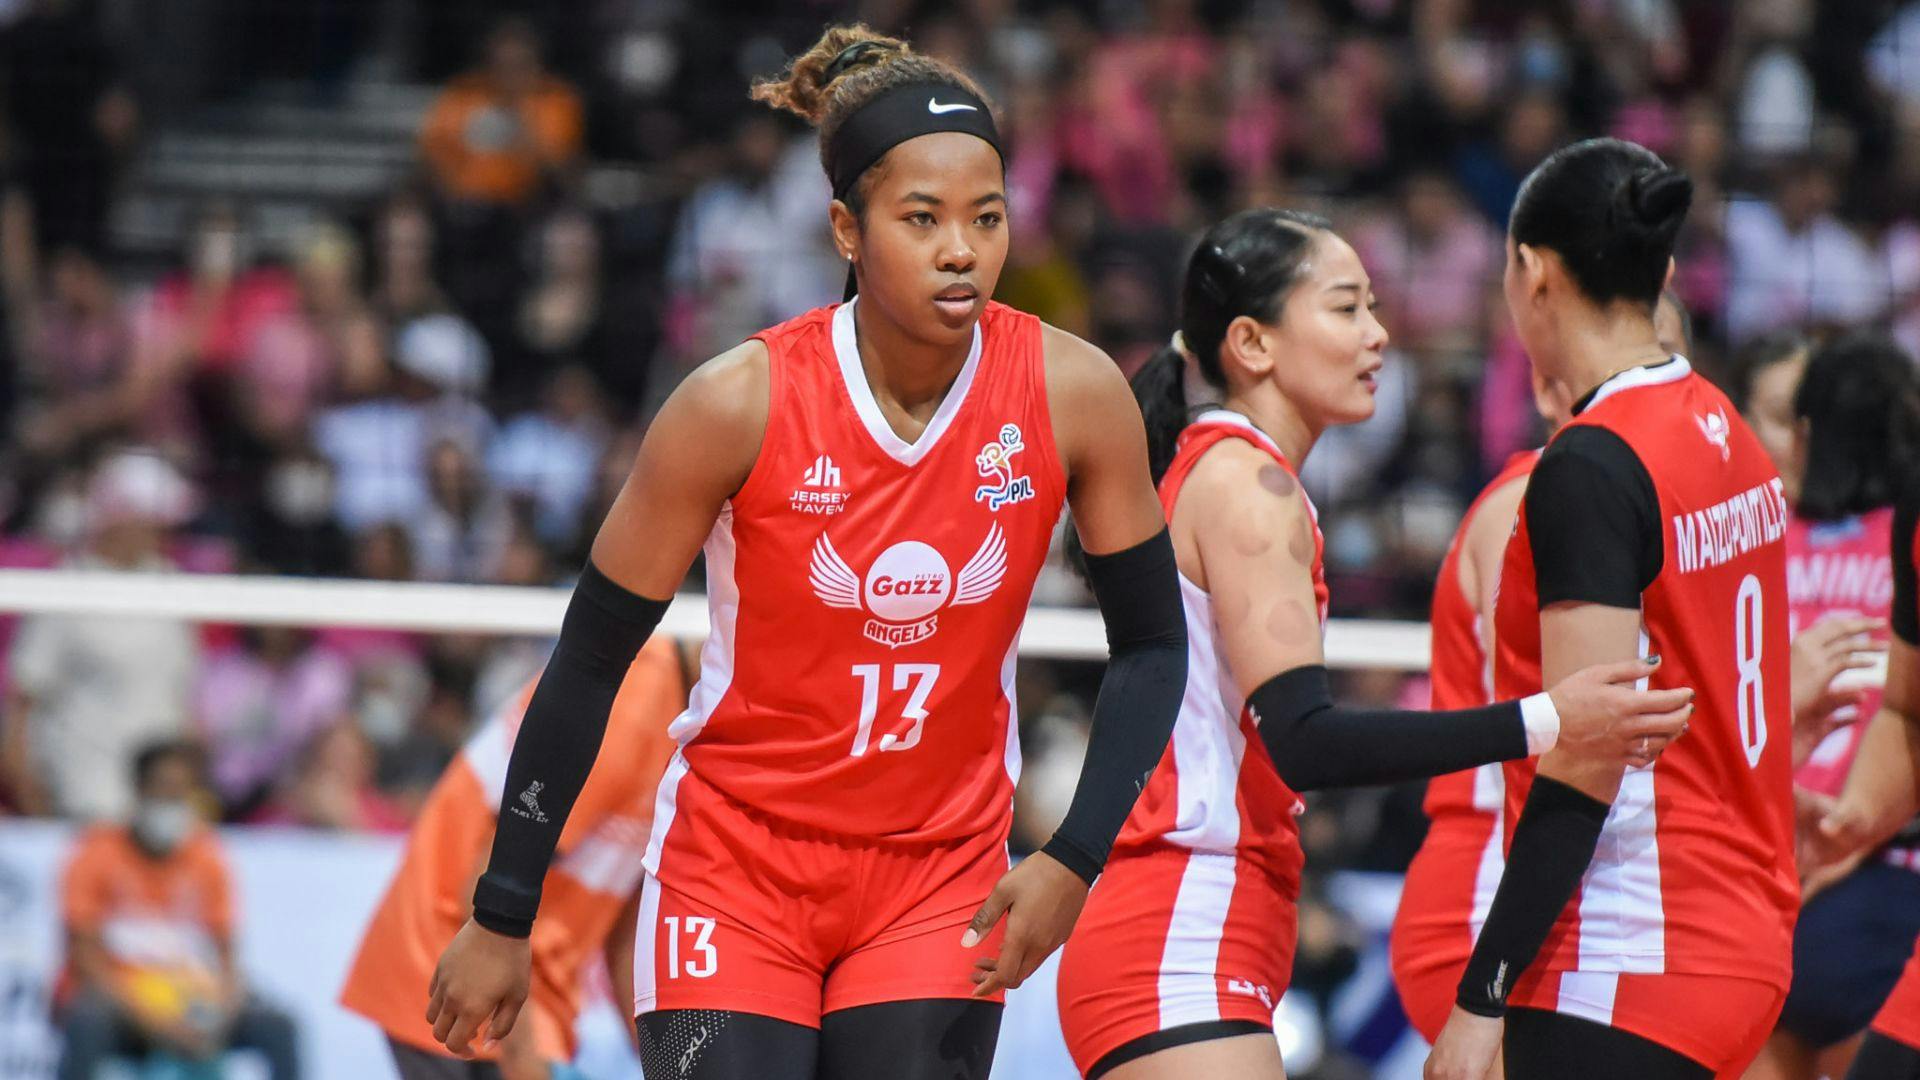 MJ Phillips selected by Gwangju AI Peppers as Asian import for Korean V-League